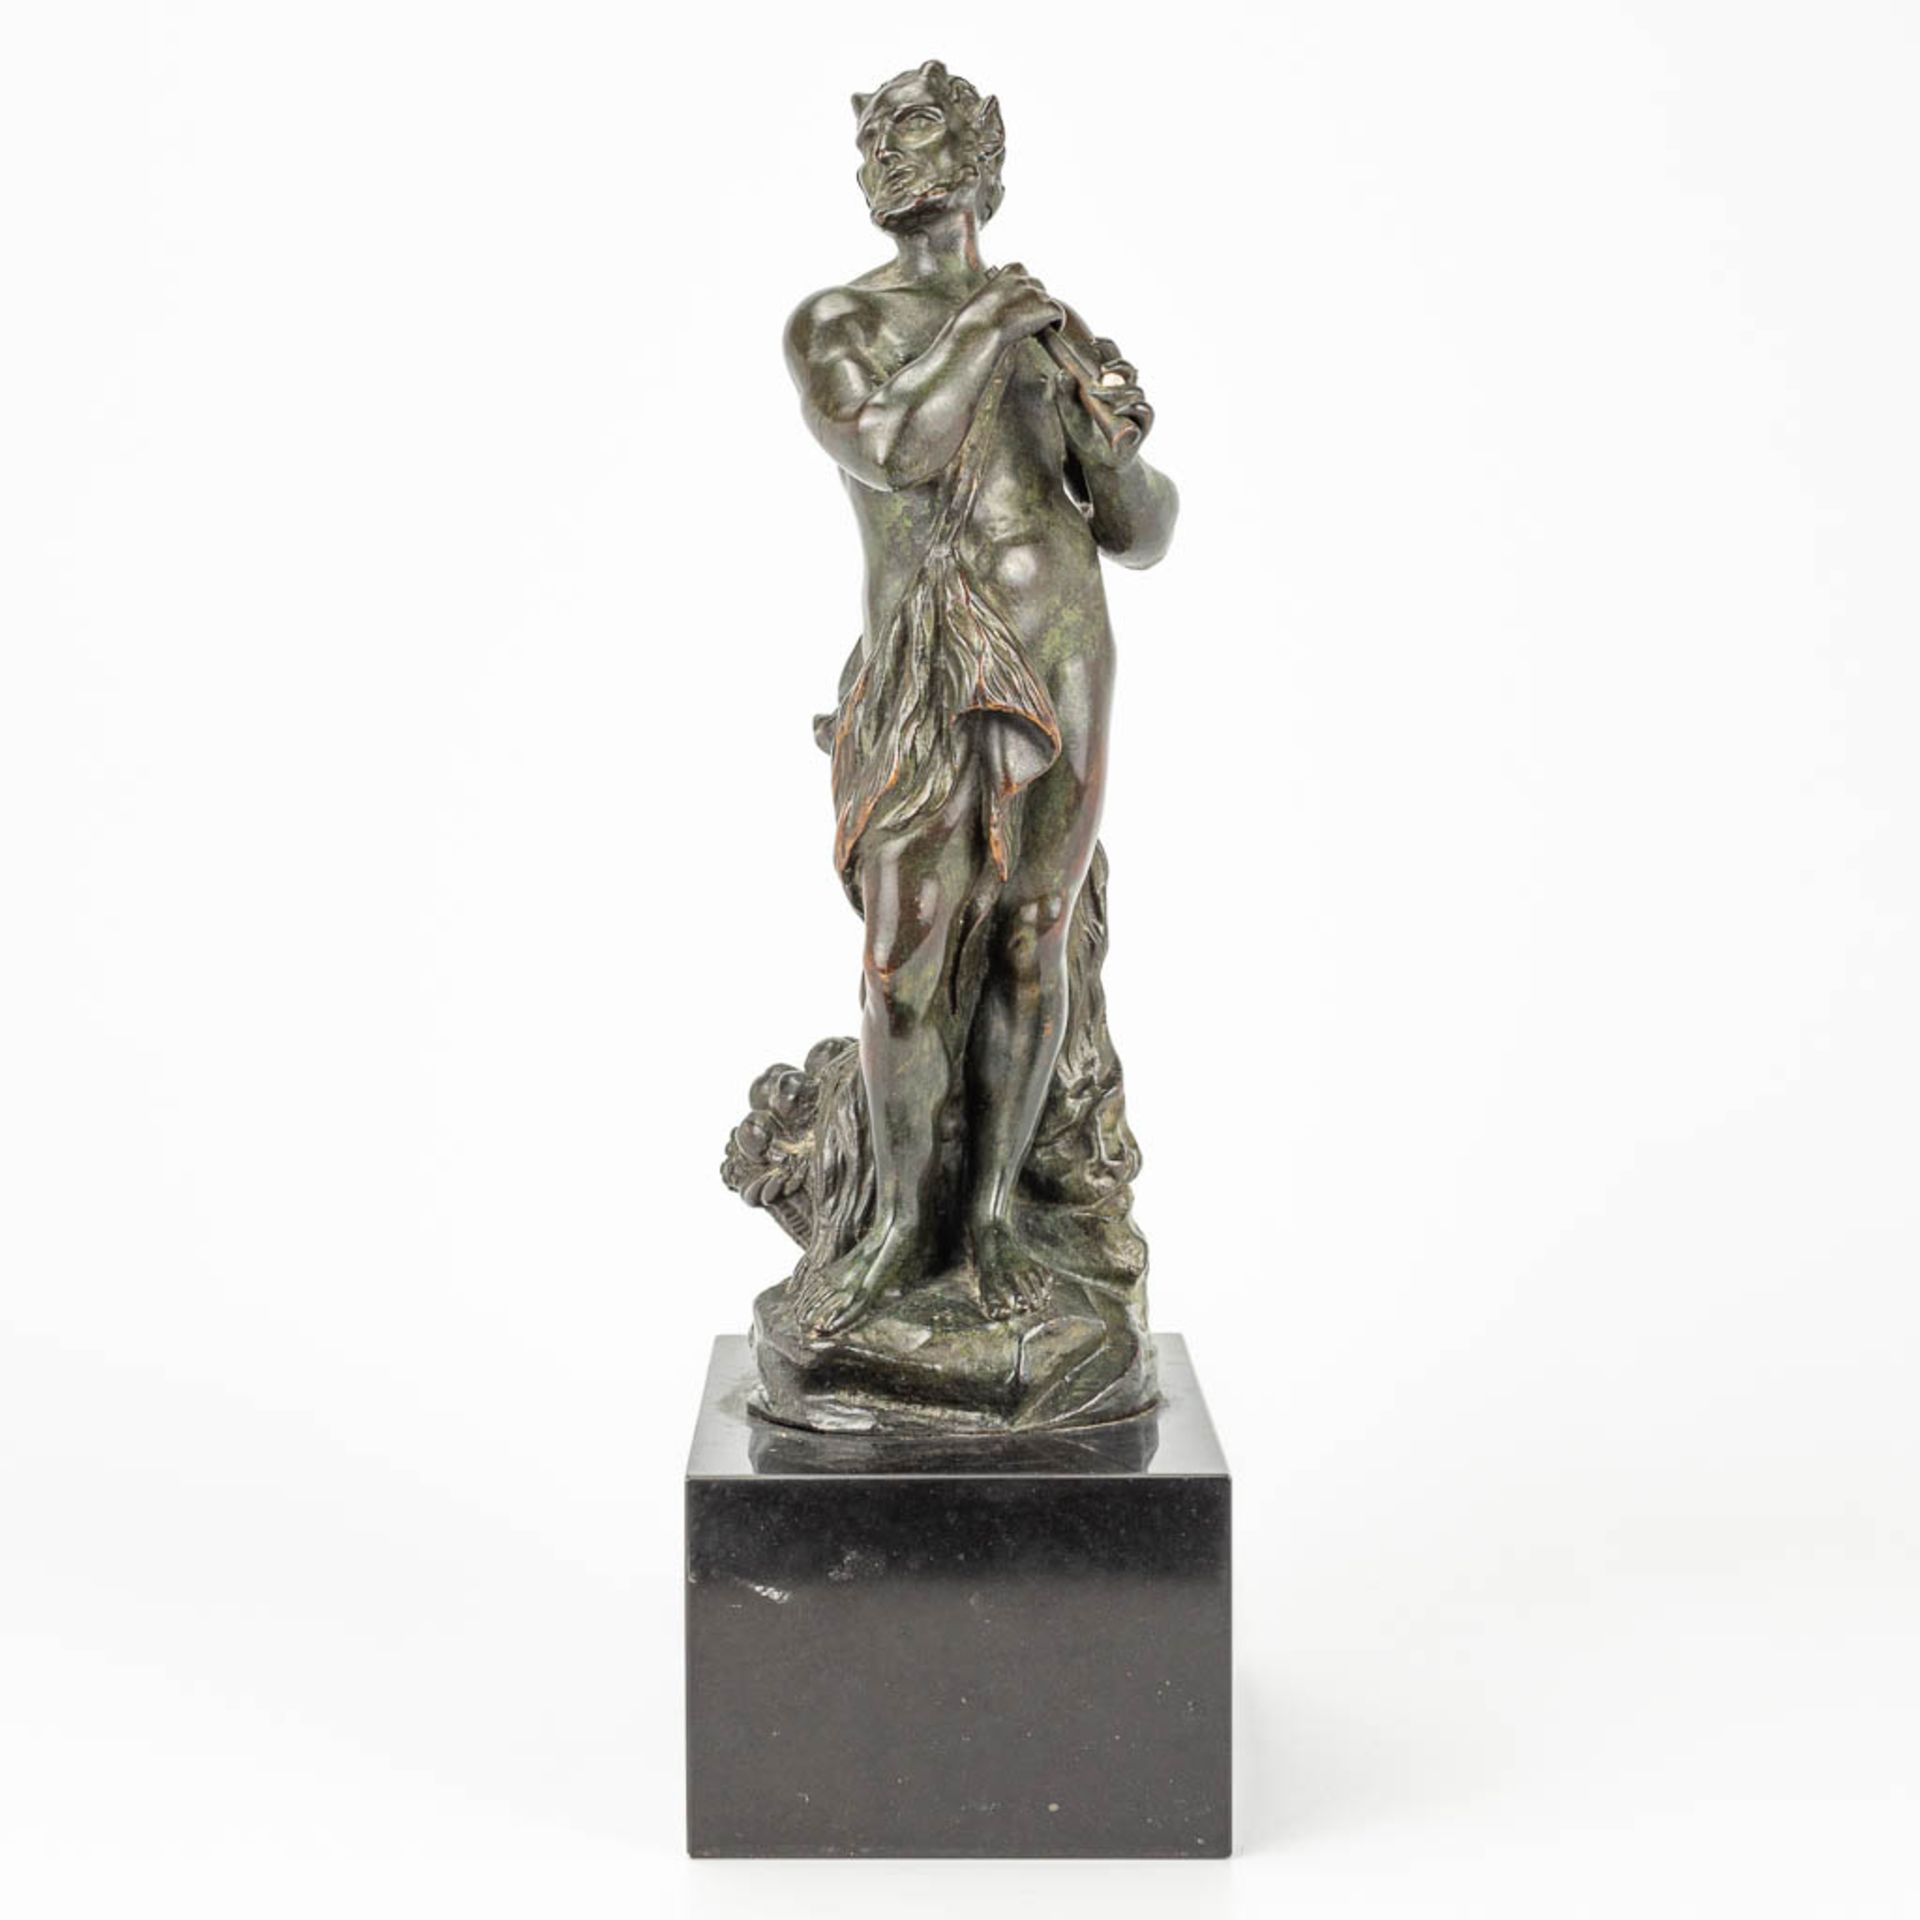 A Satyr figurine, made of bronze and mounted on a black marble base. - Image 3 of 10